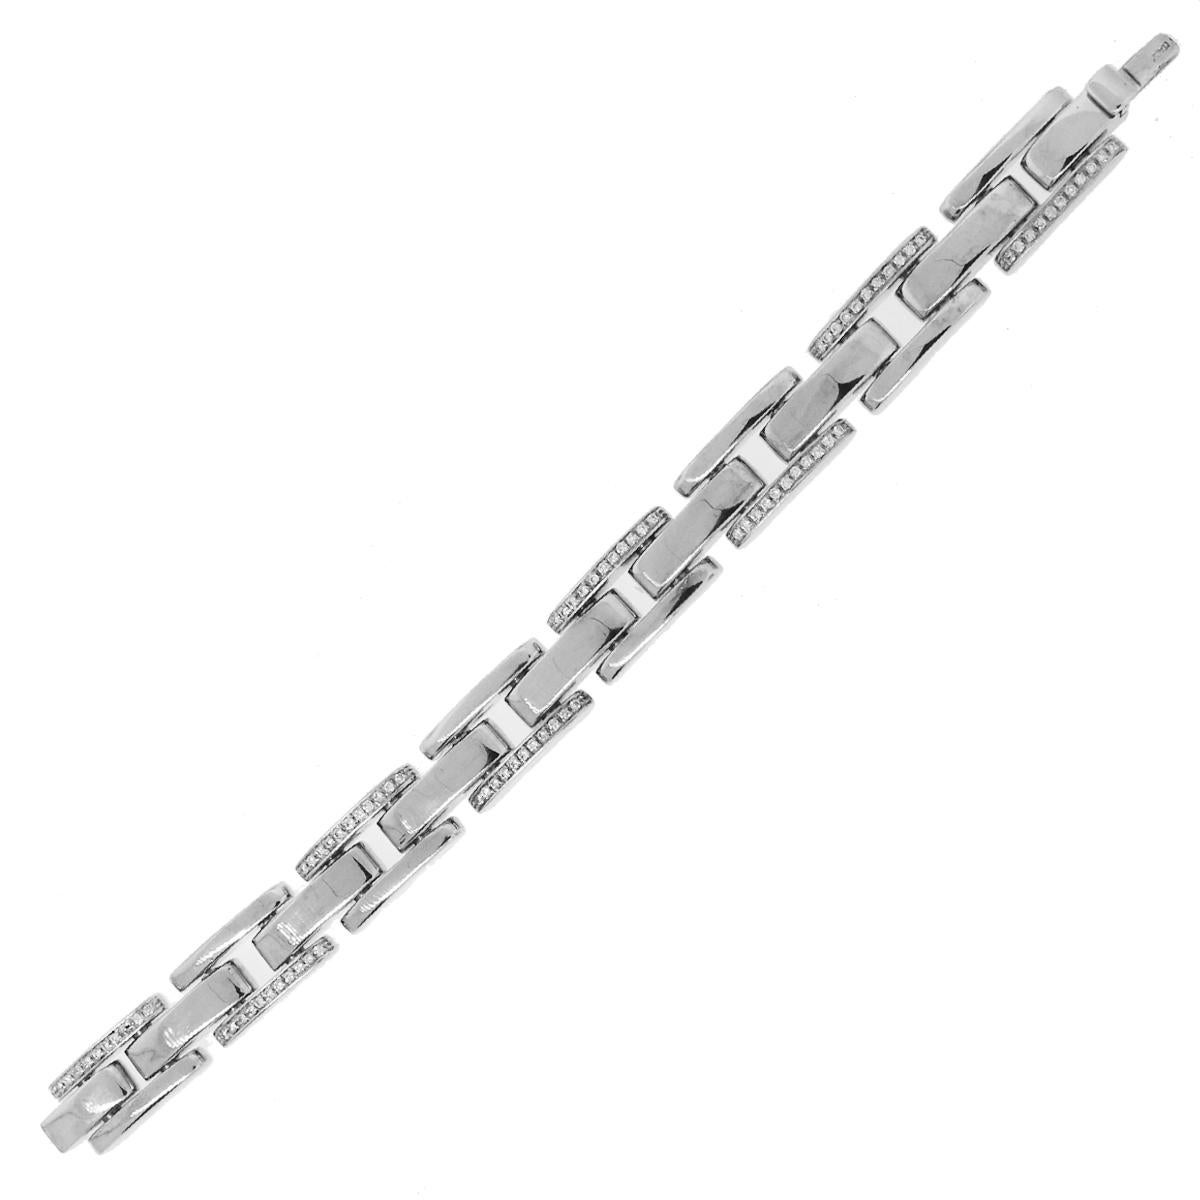 18k White Gold 1.50ctw Diamond Bar Link Bracelet
Material: 18k White Gold
Diamond Details: Approximately 1.50ctw round brilliant diamonds. Diamonds are J in color and S/I1 in clarity.
Clasps: Push clasp
Total Weight: 47.2g (30.50dwt)
Length: